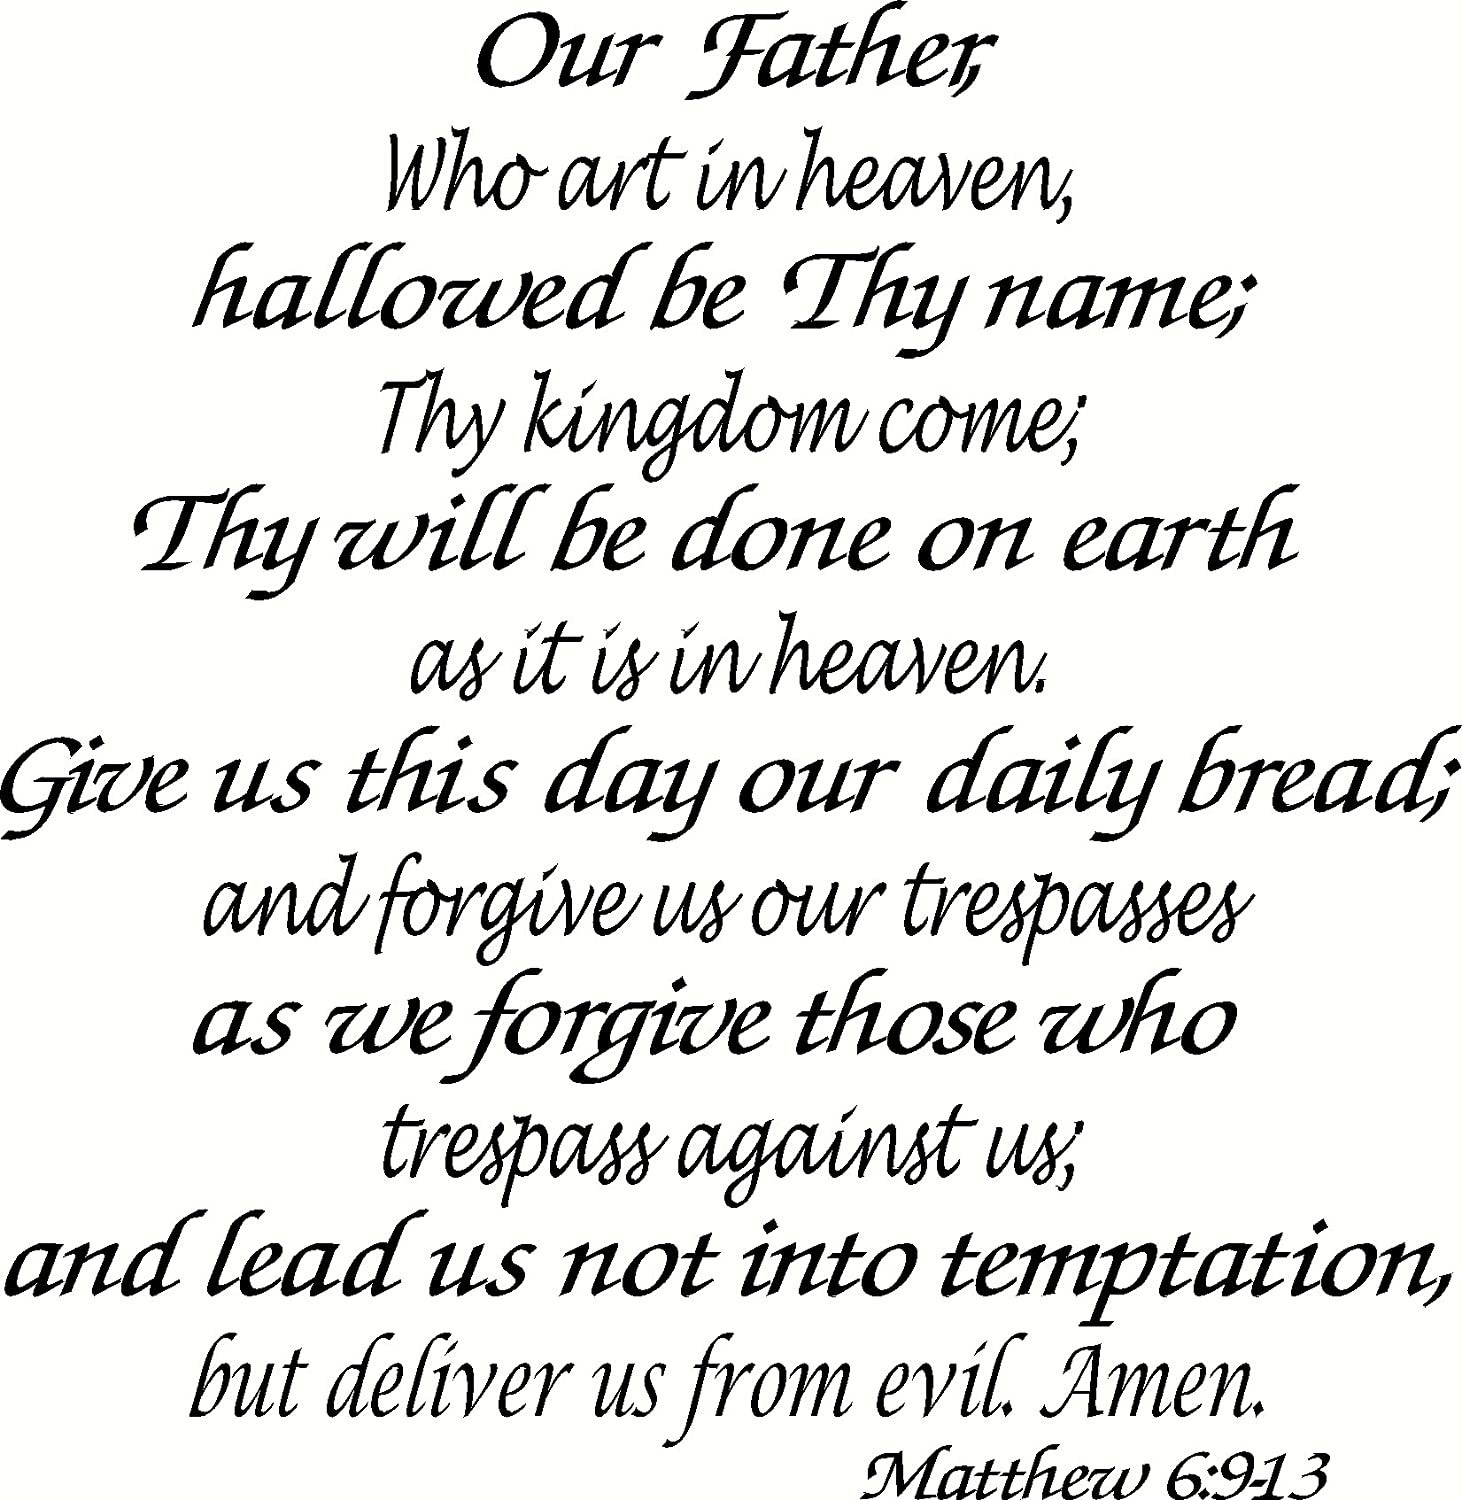 Our Father Our Father in heaven, holy be your Name, Your kingdom